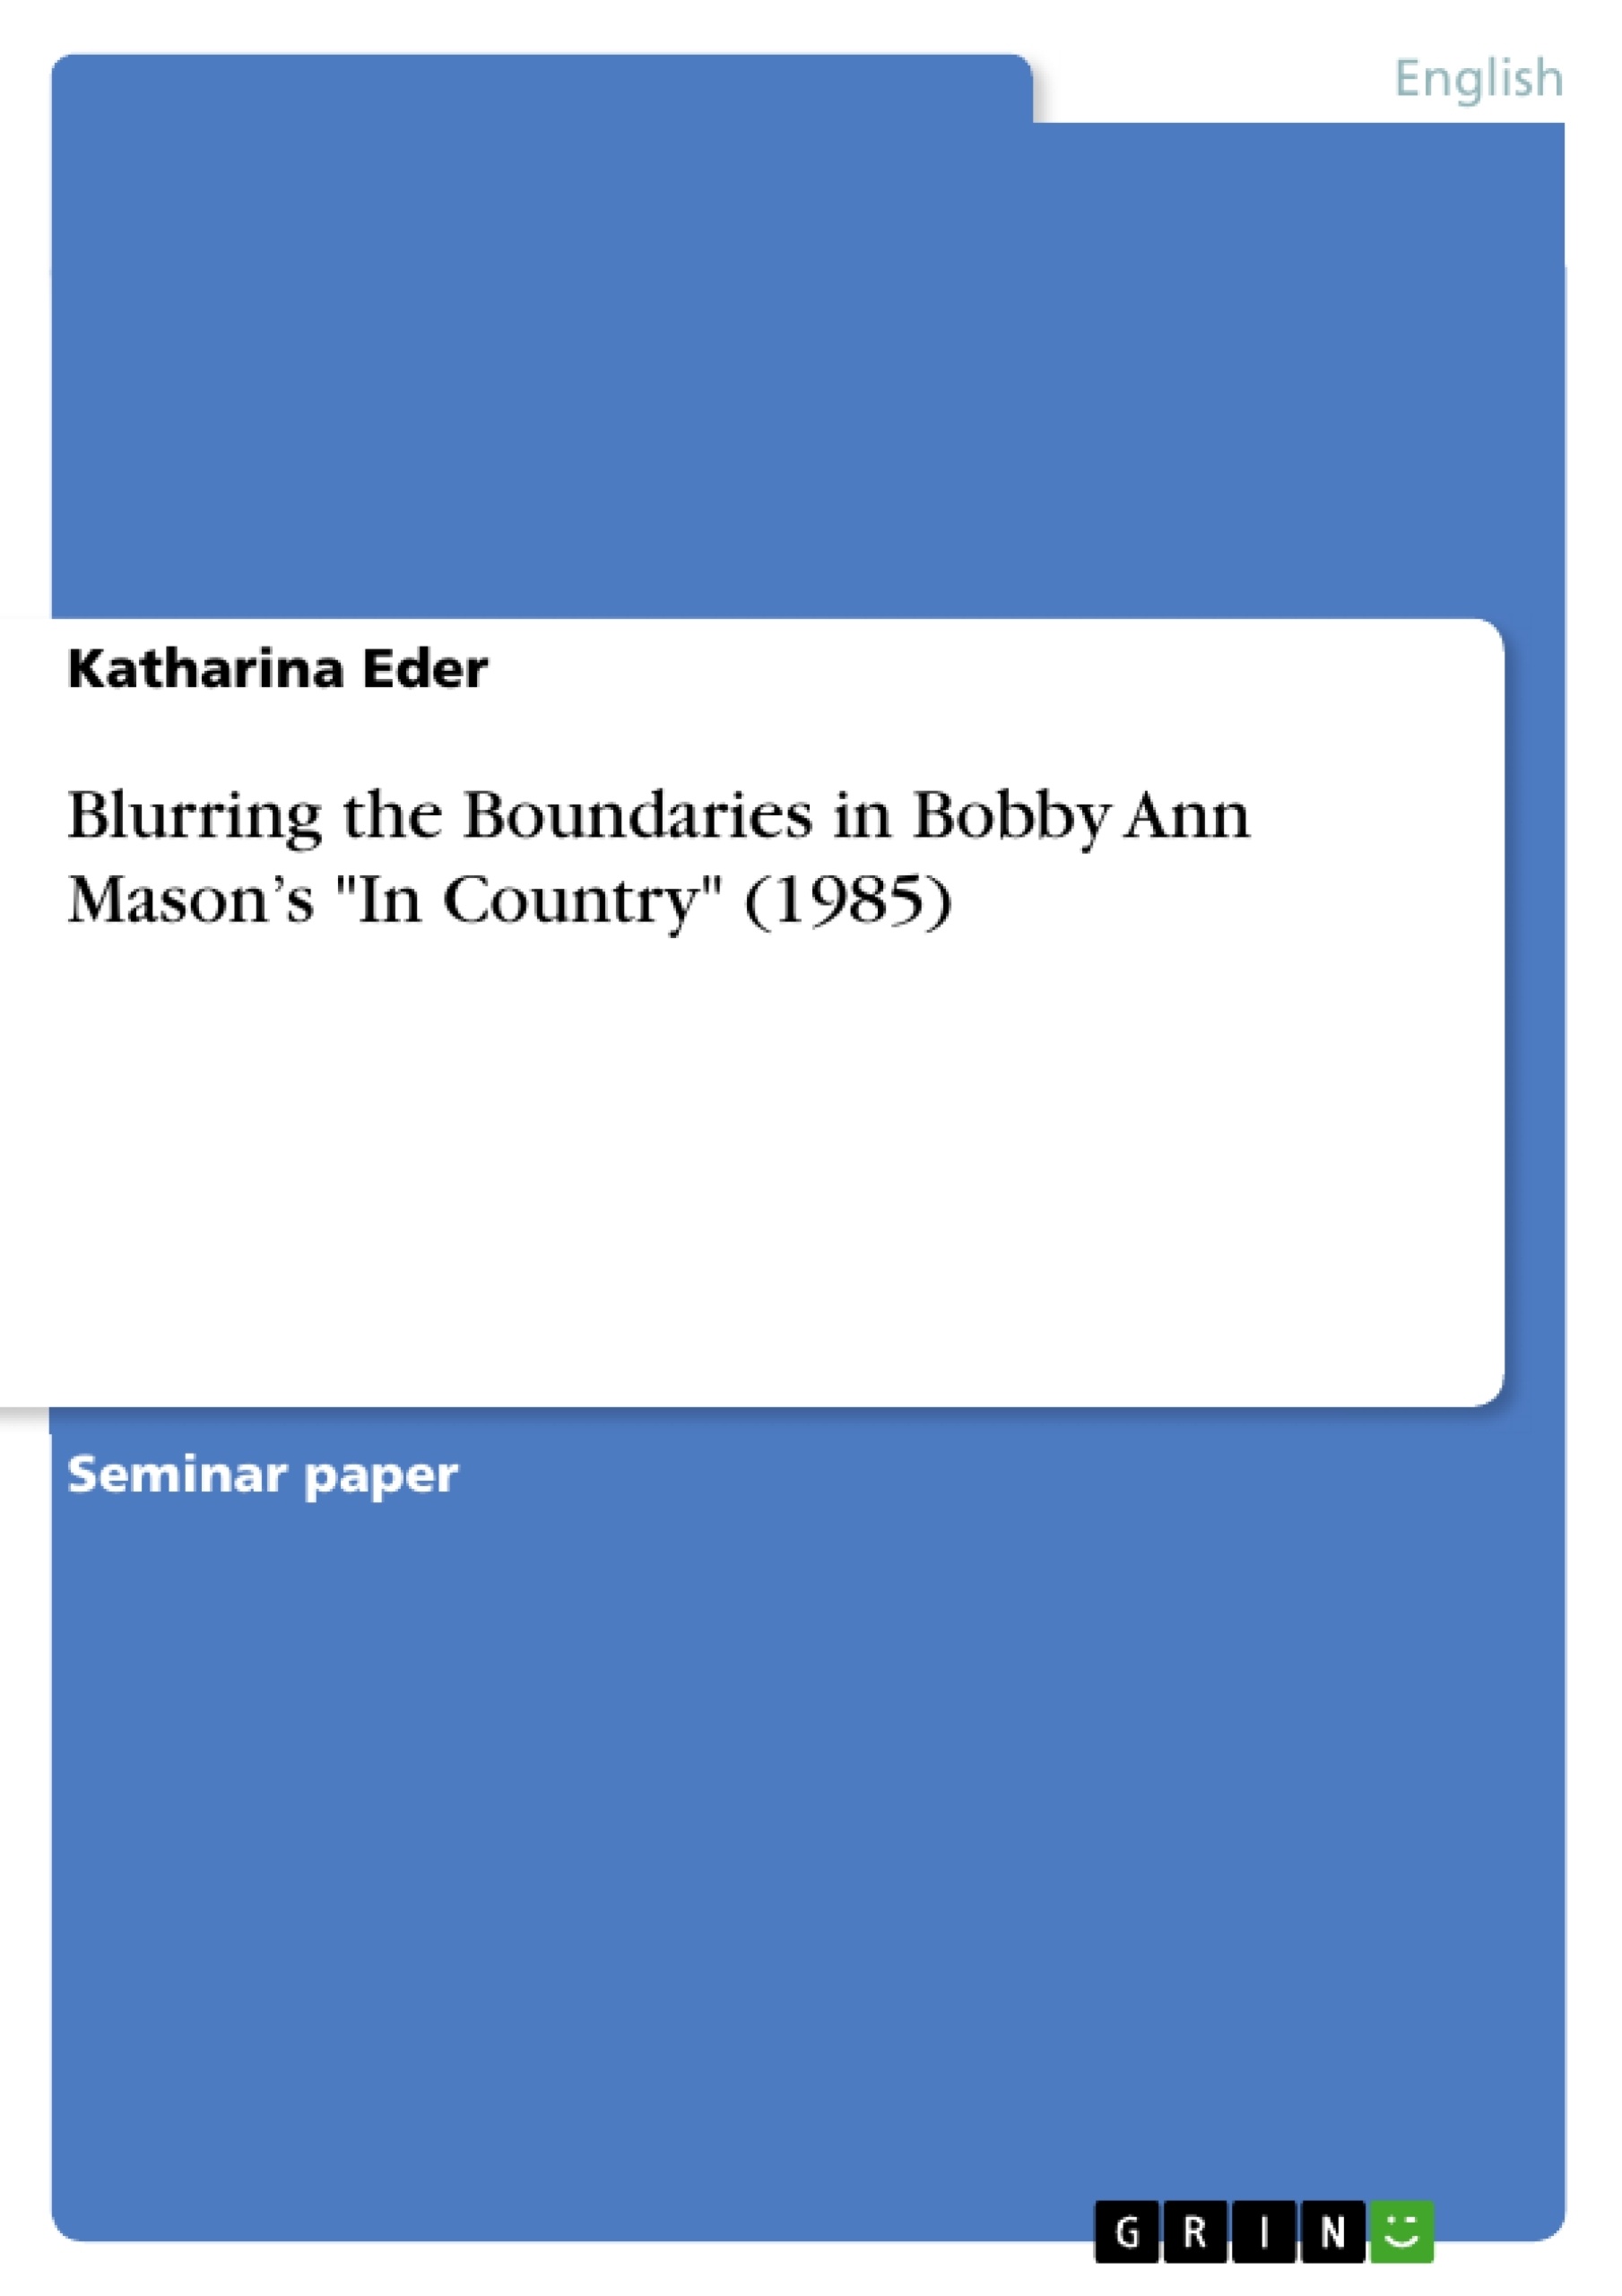 Titre: Blurring the Boundaries in Bobby Ann Mason’s "In Country" (1985) 